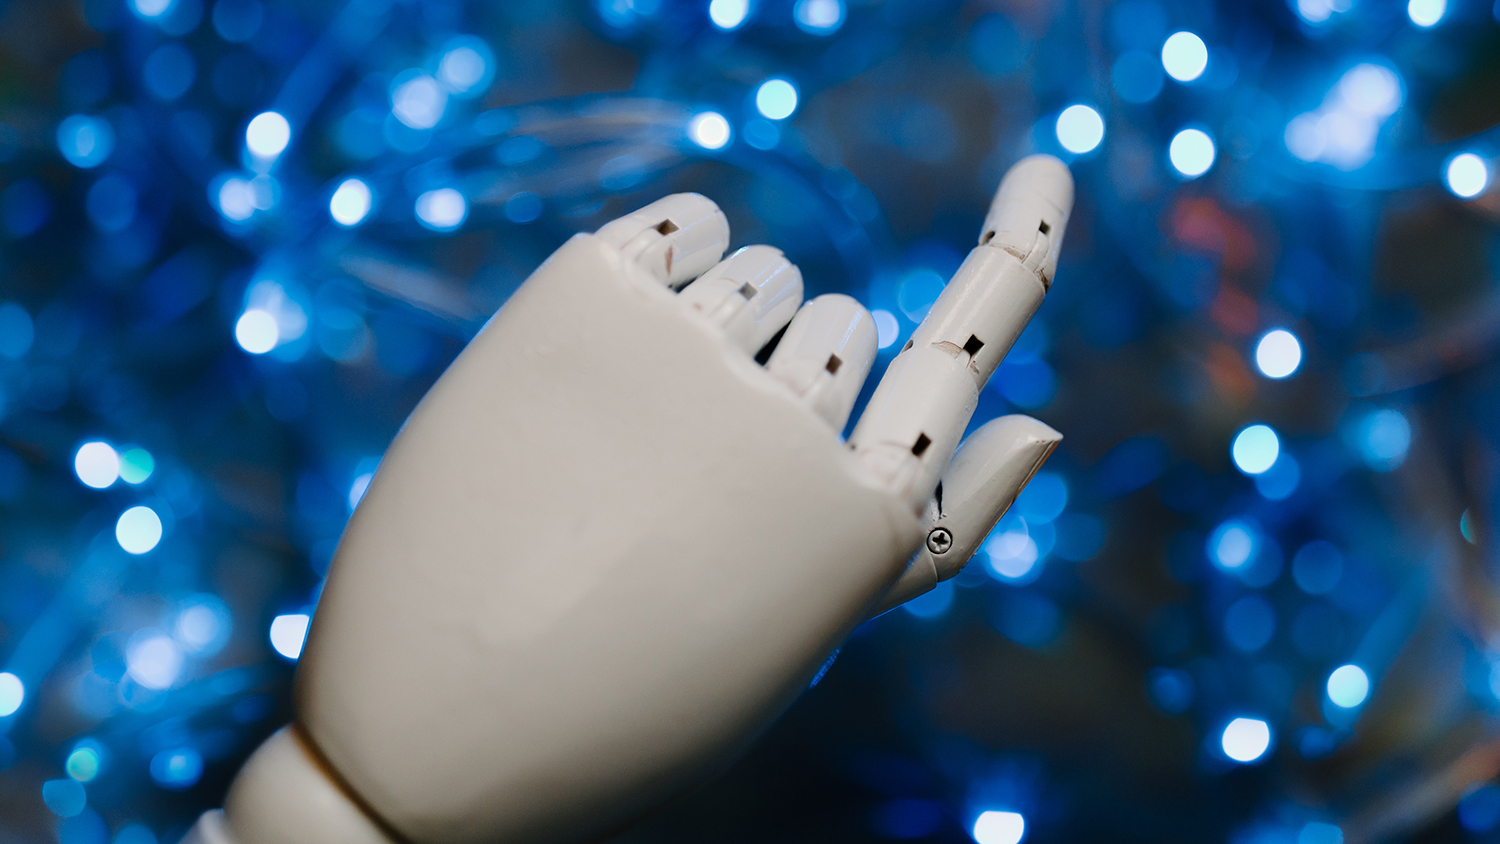 Glossy white plastic robotic hand with index finger extended over a white and blue illuminated background.